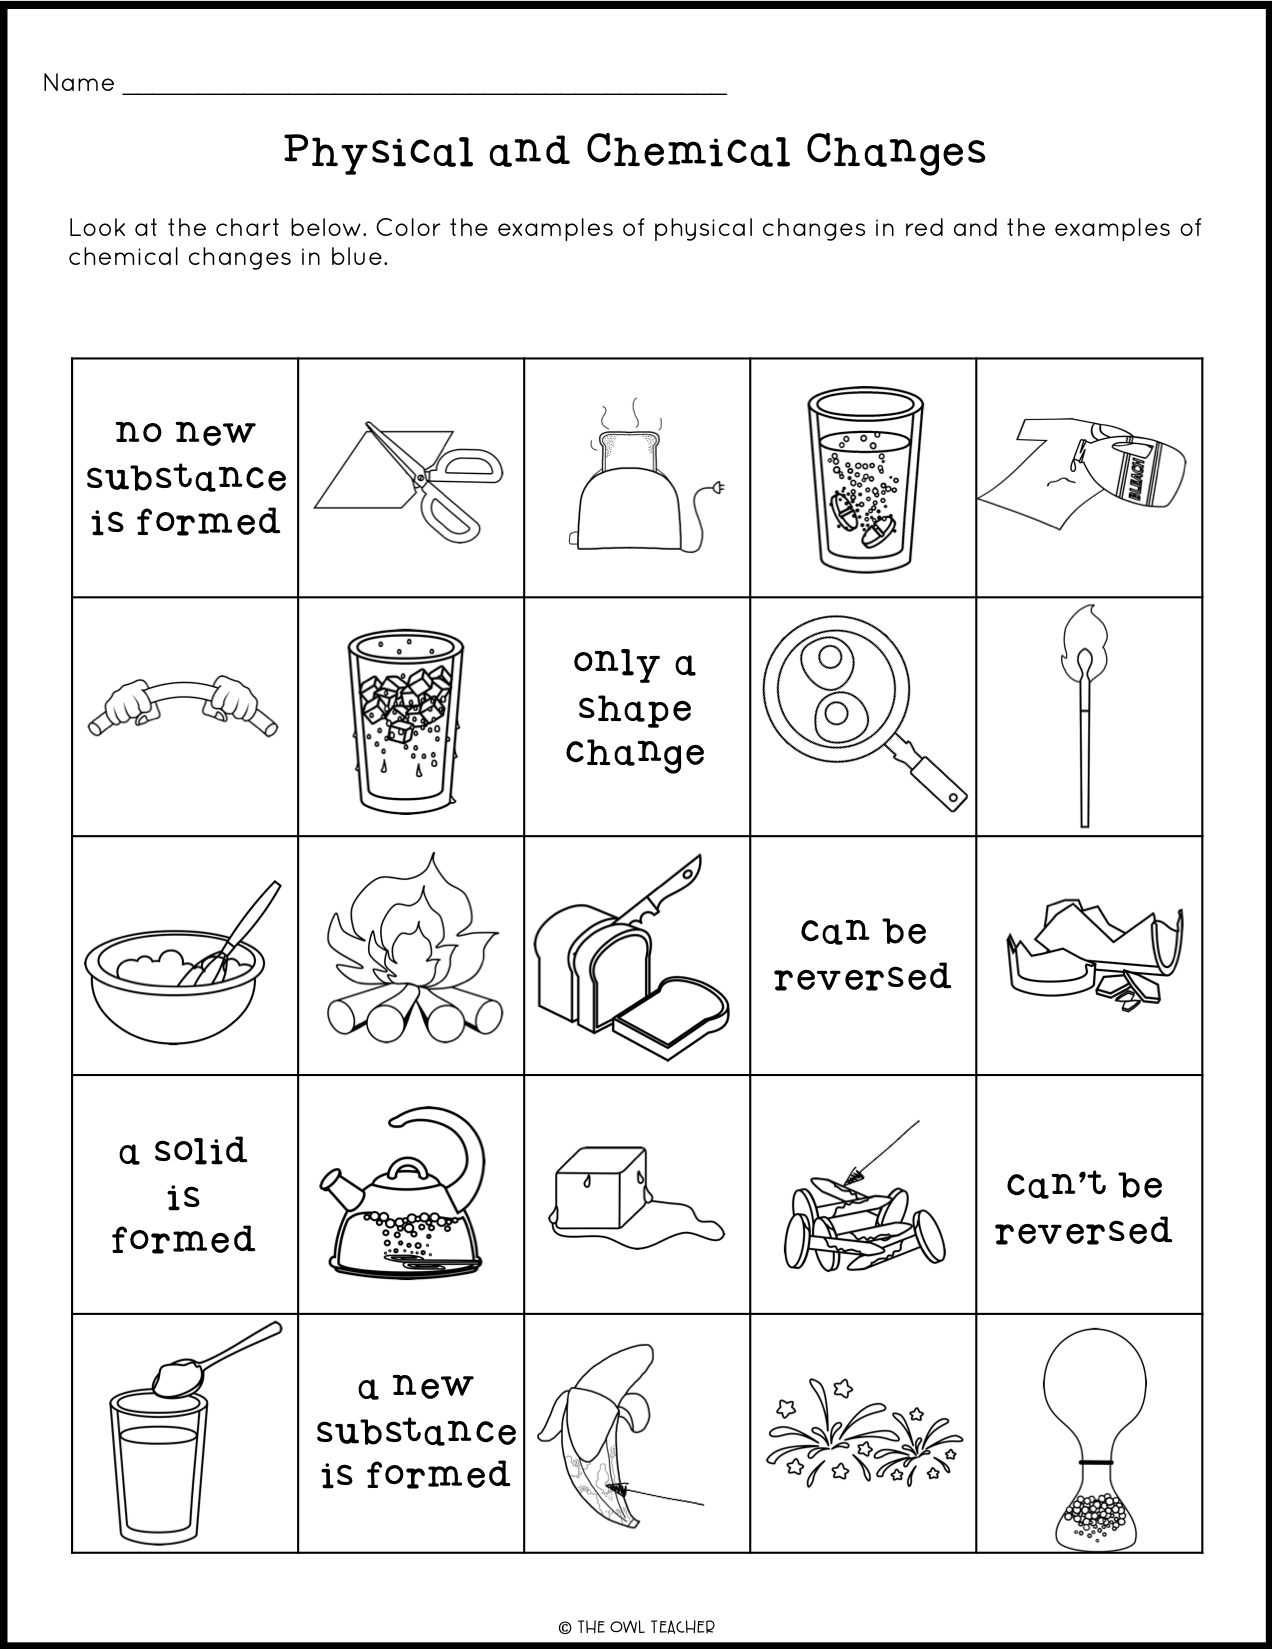 Physical and Chemical Changes Craftivity - The Owl Teacher With Chemical And Physical Change Worksheet